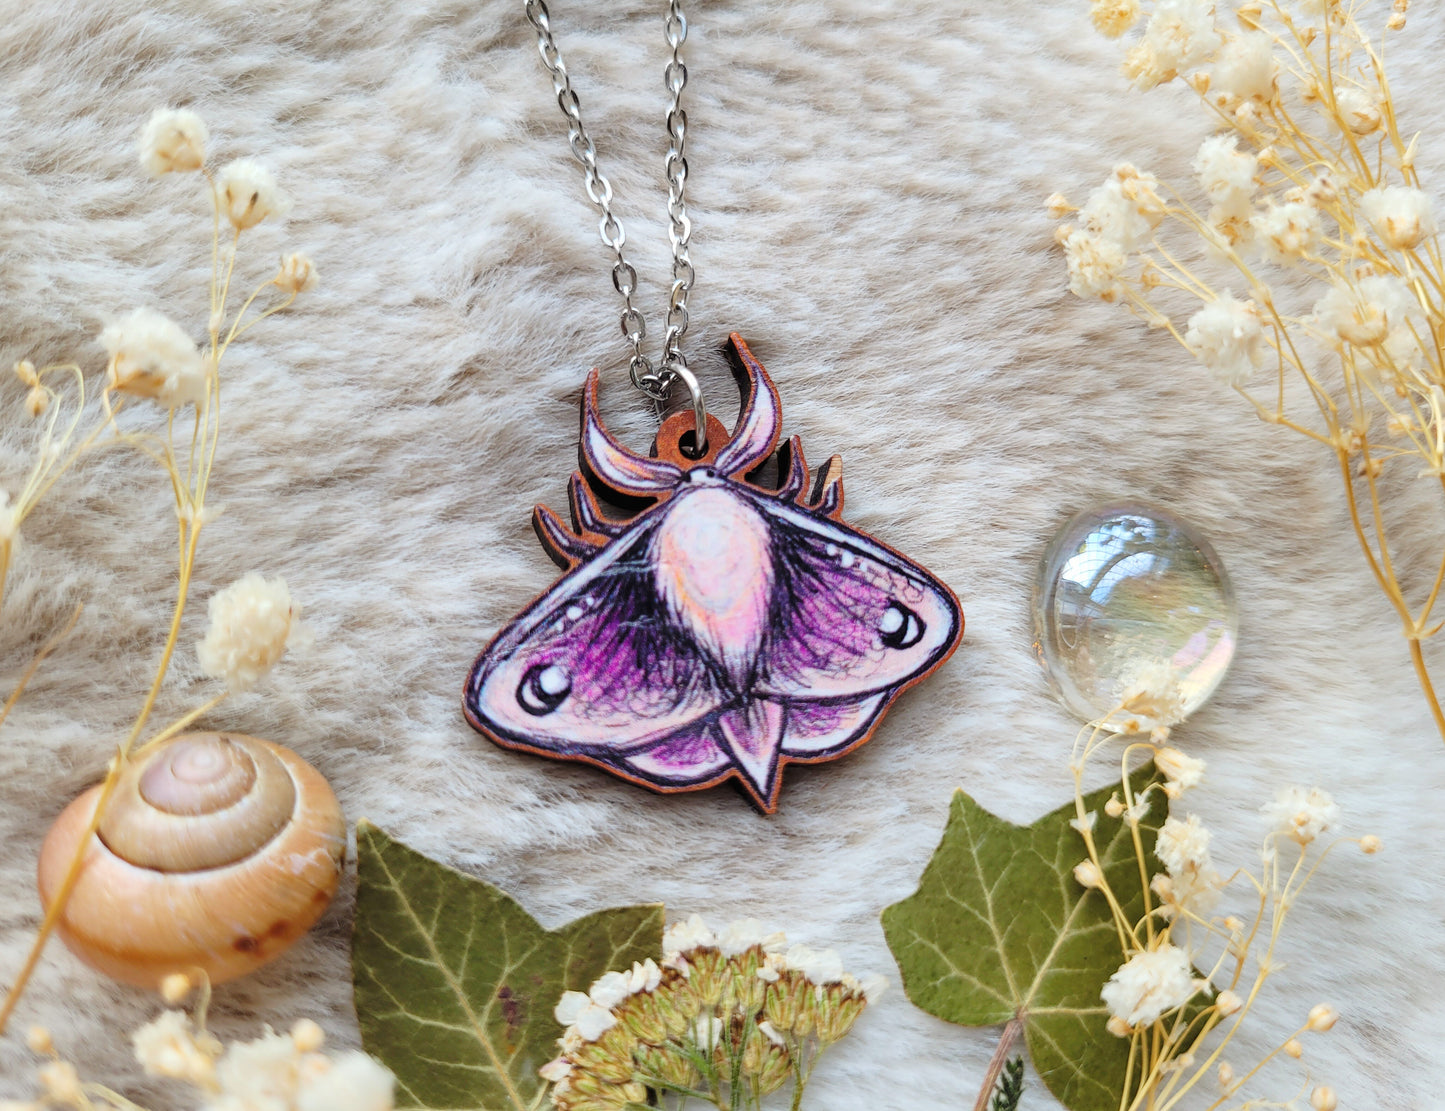 Magical Moth Illustrated necklace, responsibly sourced cherry wood, chain options available, by Grace Moth